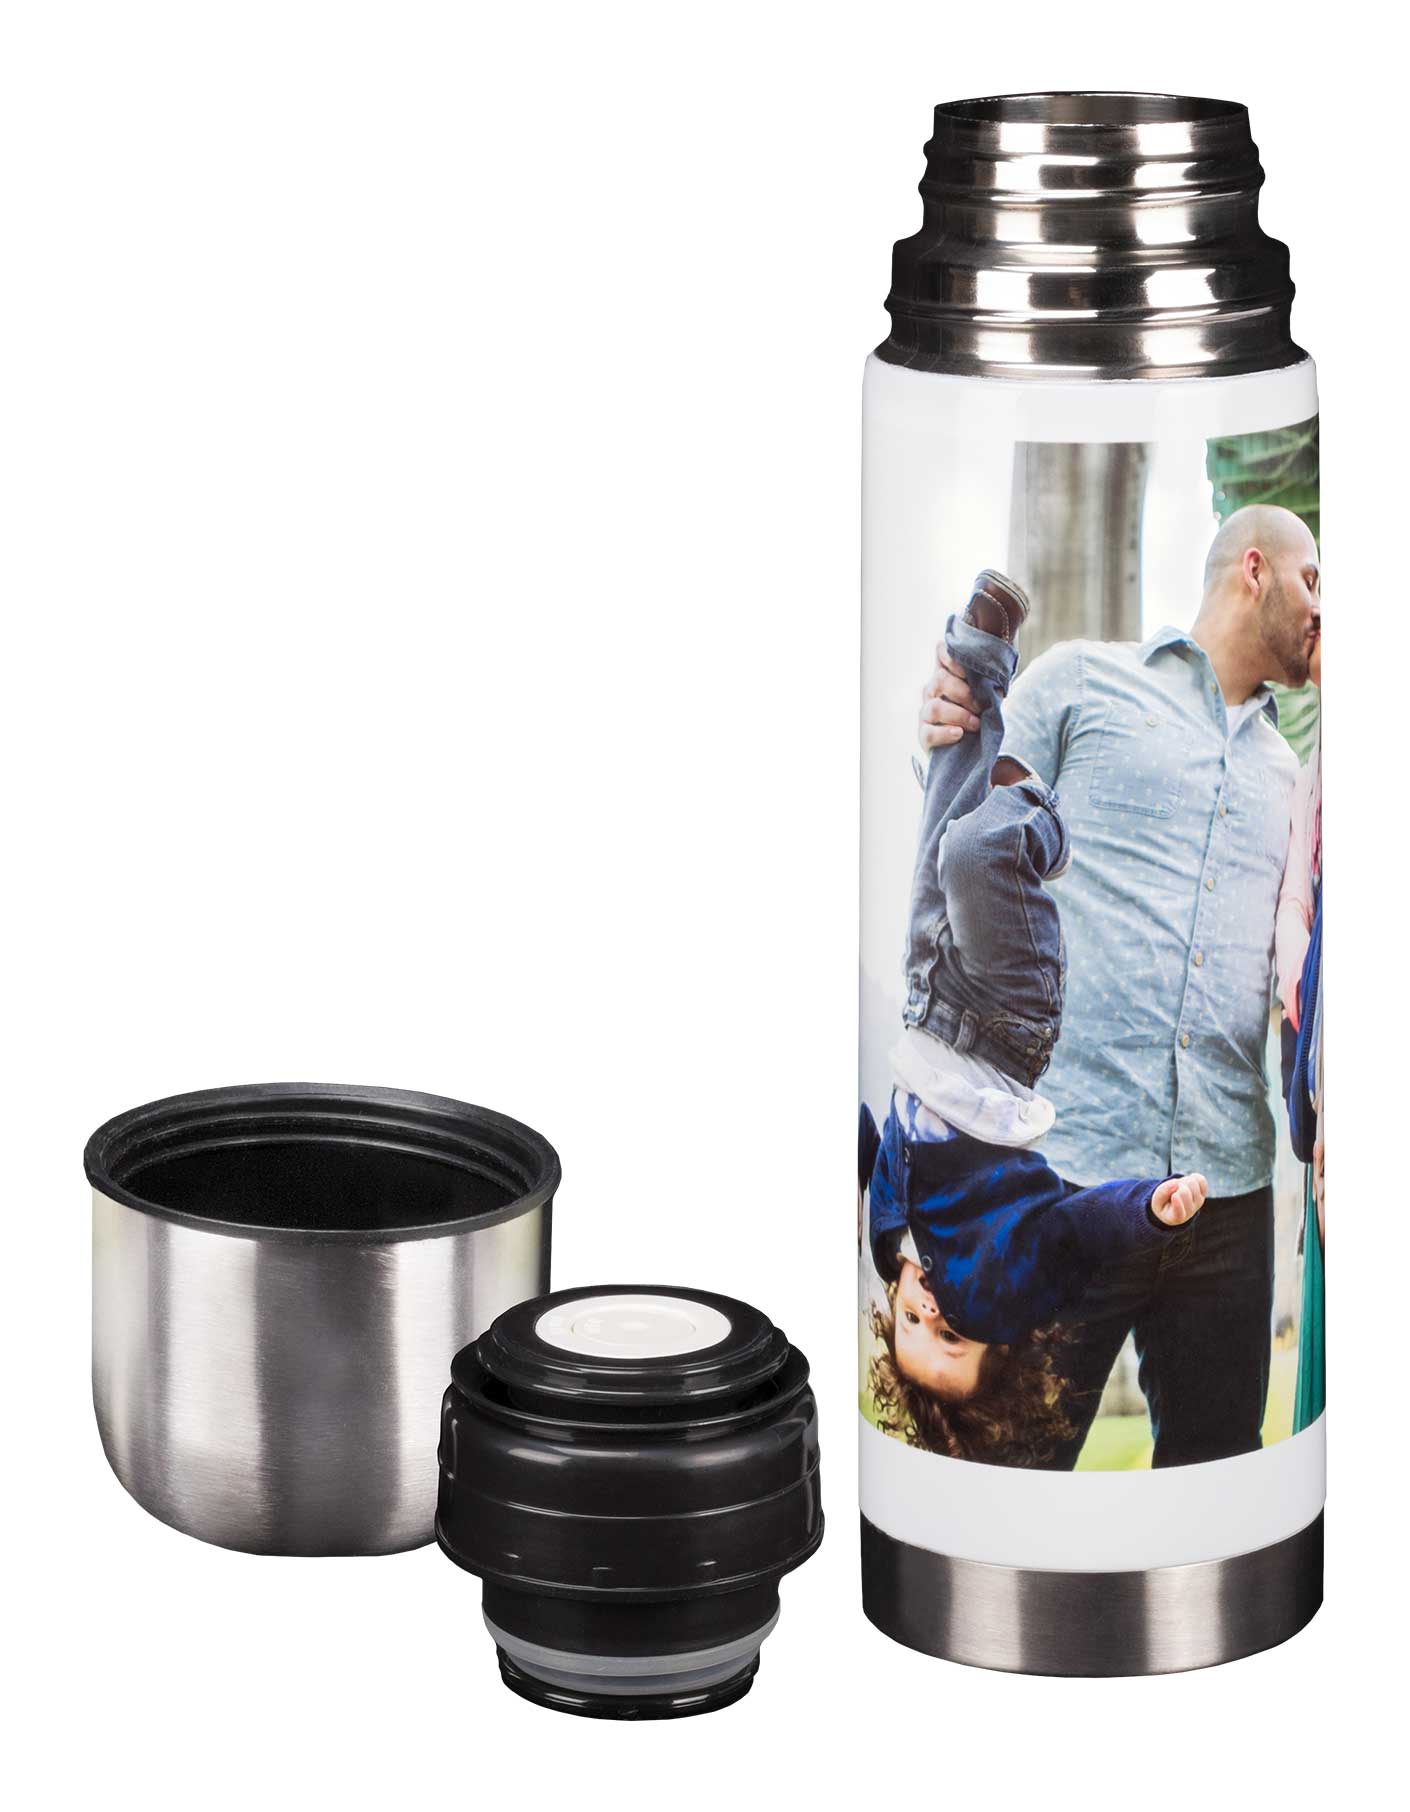 Custom Stainless Steel Thermoses, Design & Preview Online